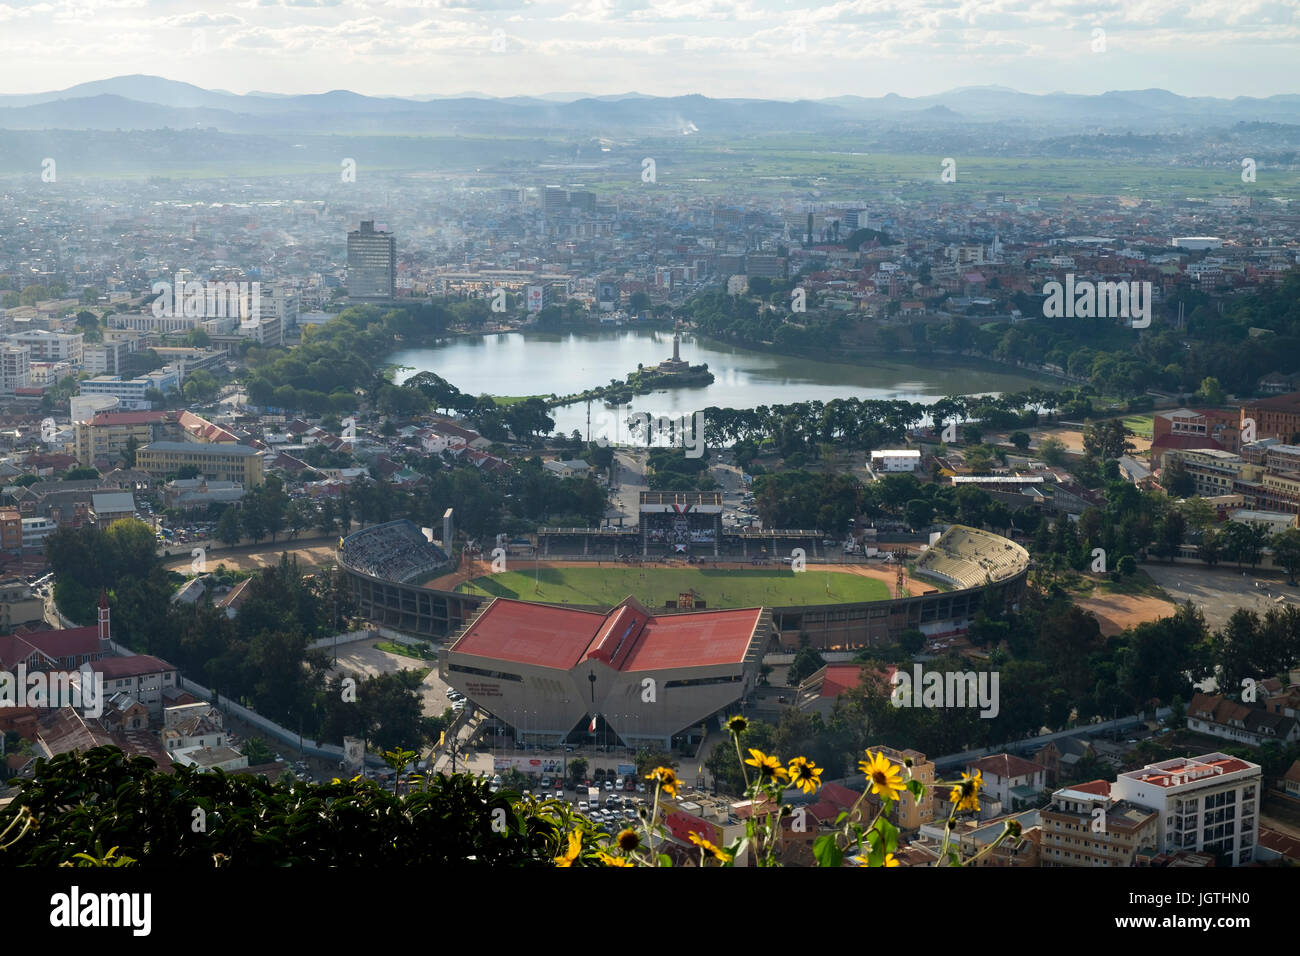 Aerial view of Anosy Lake, the stadium and the National Palace of Culture and Sports in Antananarivo, Madagascar Stock Photo